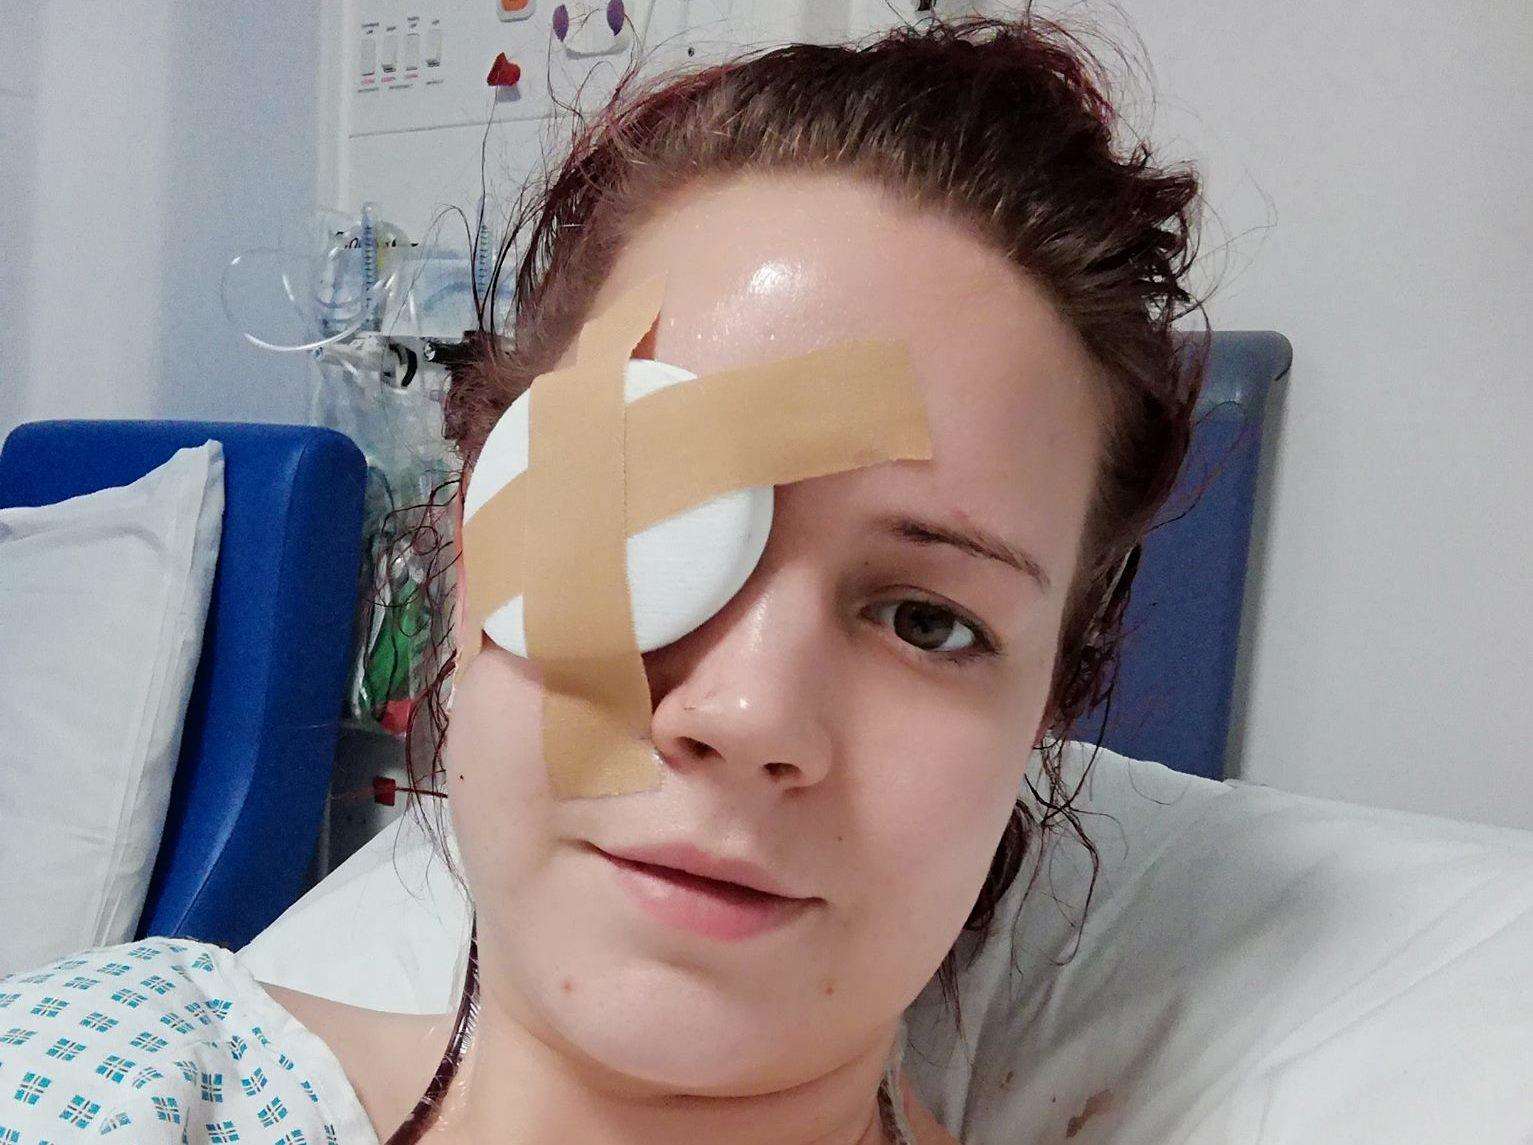 Toni Crews from Deal after her major surgery in January